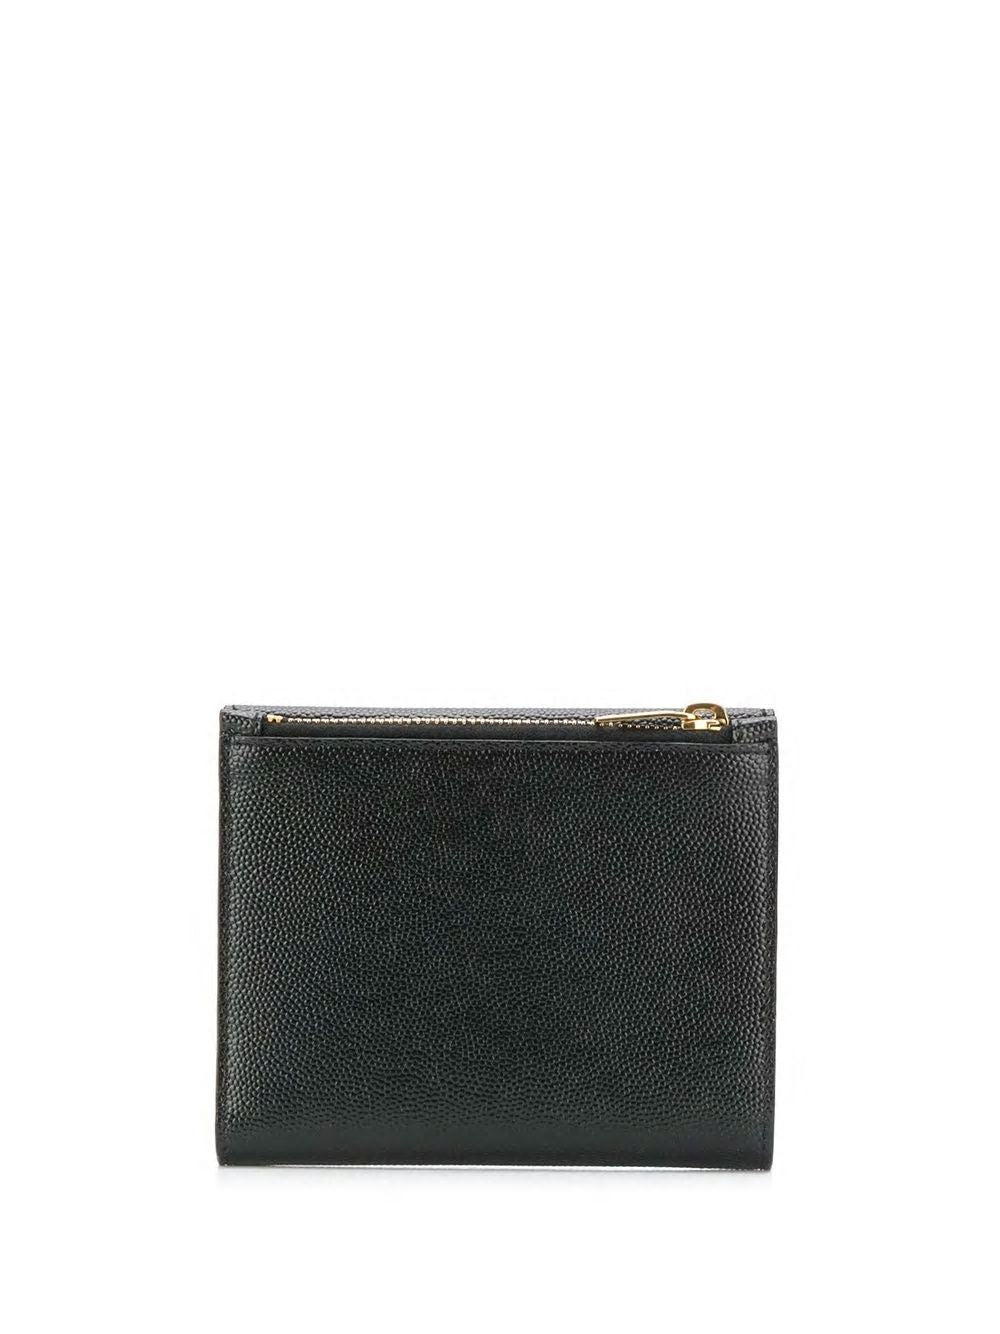 Elegant Compact Wallet for Women in Calfskin Leather